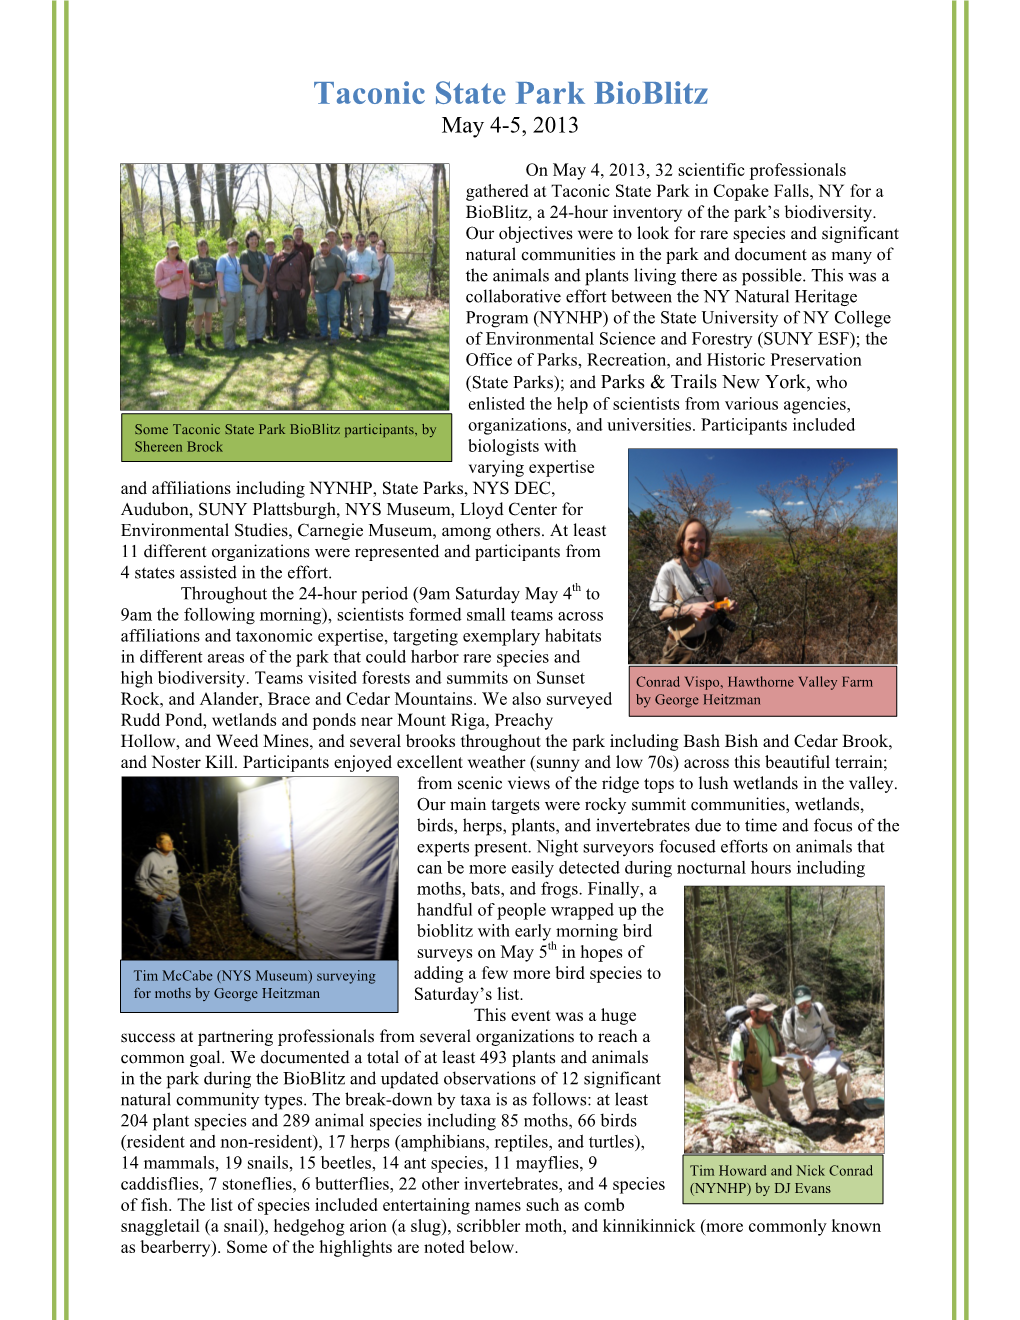 Taconic State Park Bioblitz, May 2013